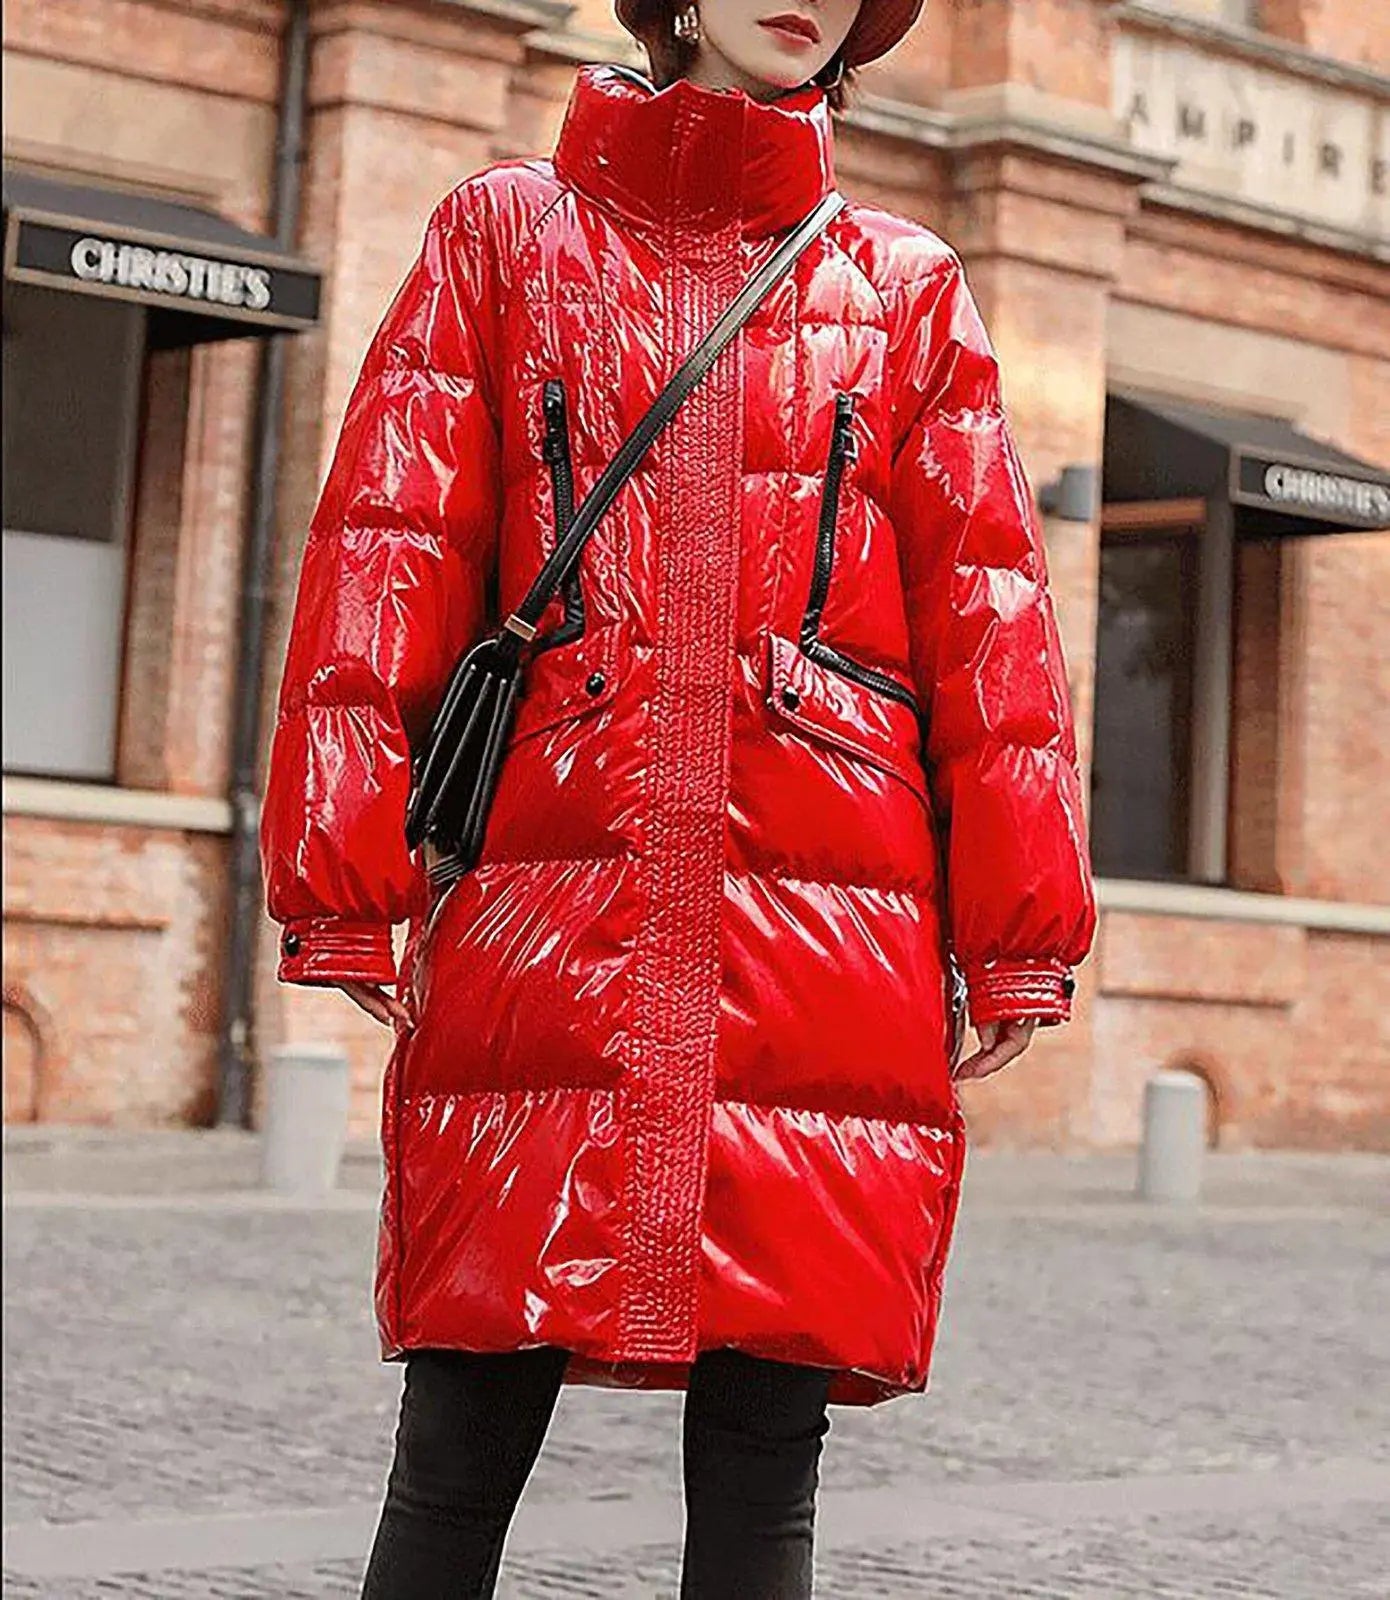 Women's Oversize Shiny Down Coat,Plus Size Down Jacket,Red Down